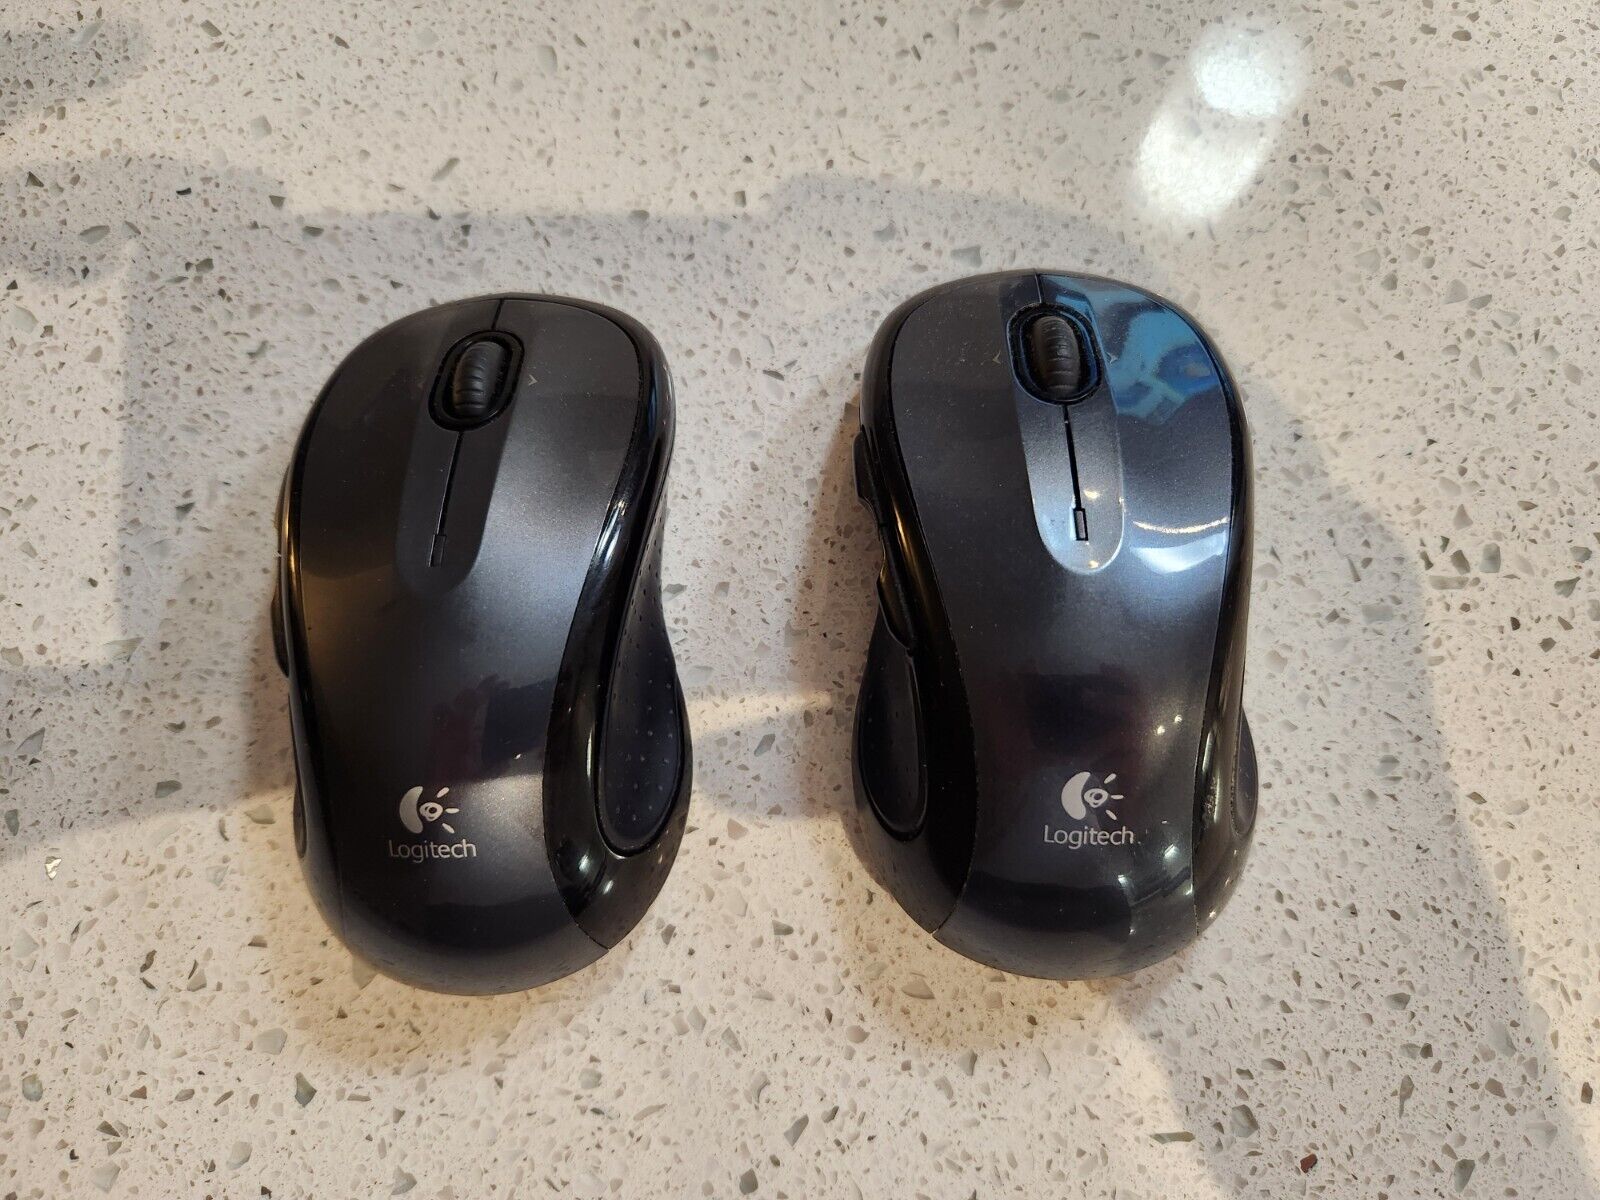 Pair of Logitech M510 Wireless Laser Mouse for PC/MAC includes 2